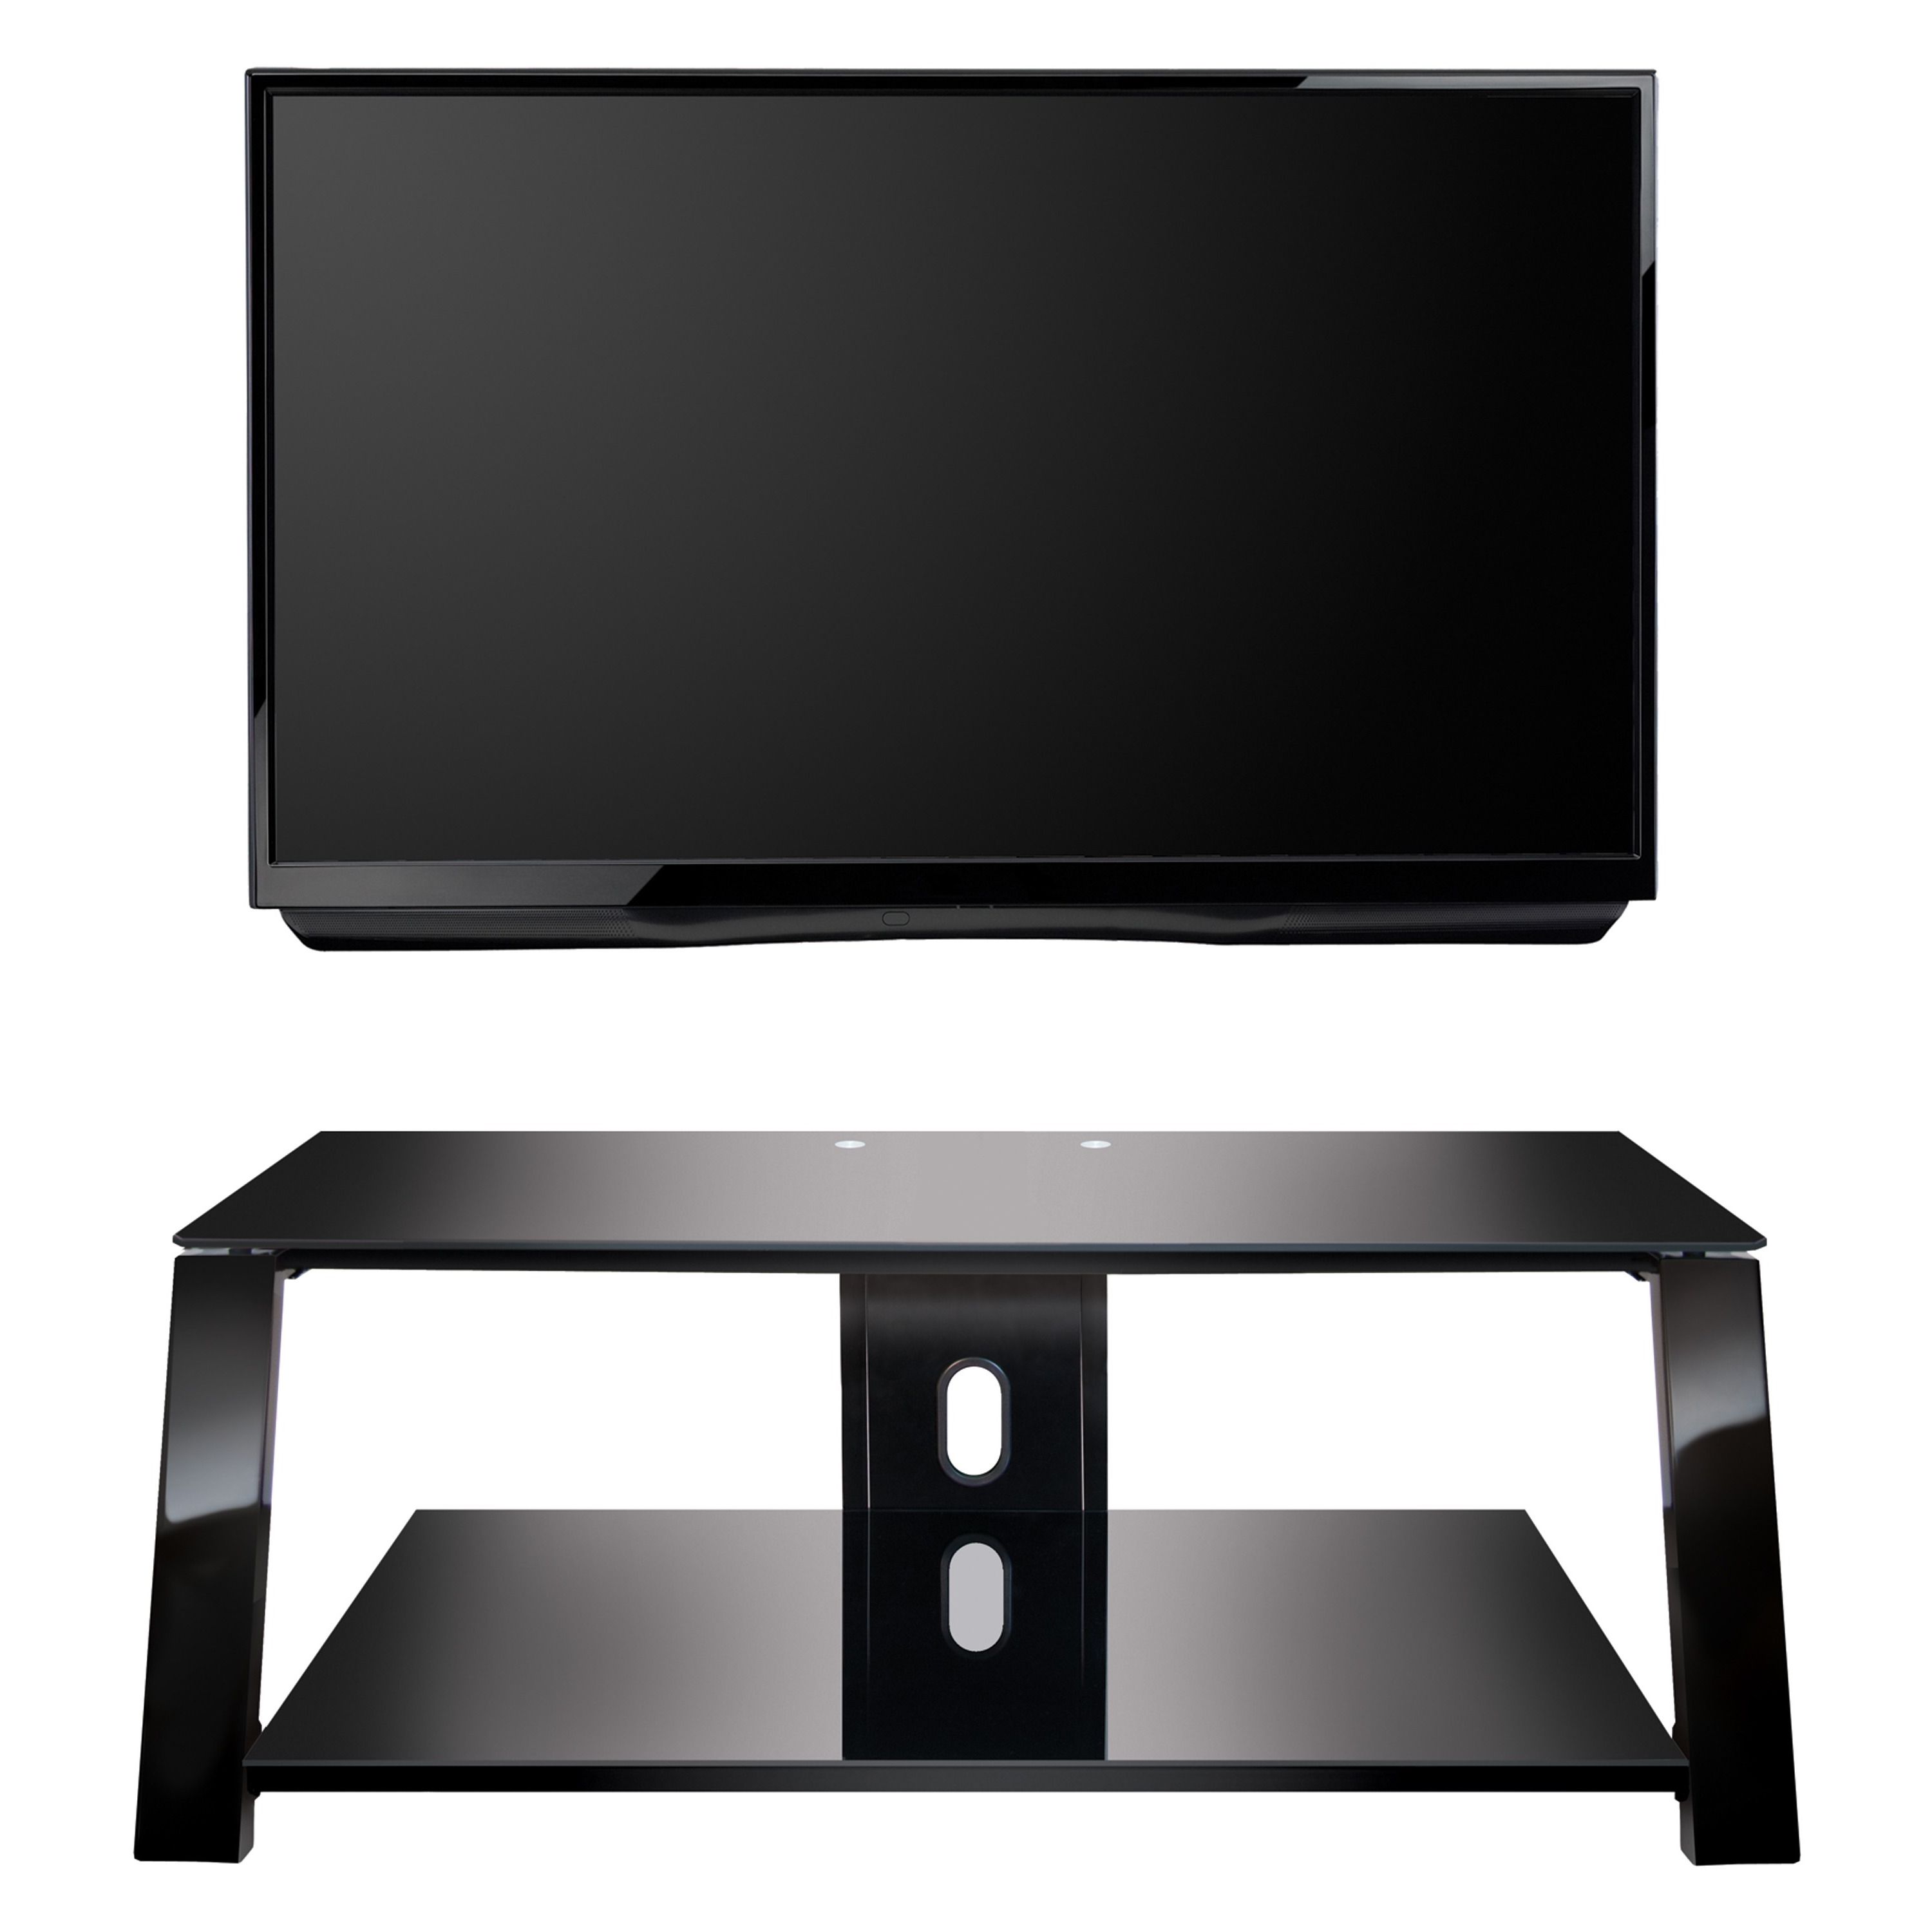 2018 Bell O Triple Play Tv Stands With Shop Bell'o Tp4444 Triple Play 44 Inch Black Tv Stand For Tvs Up To (View 13 of 20)